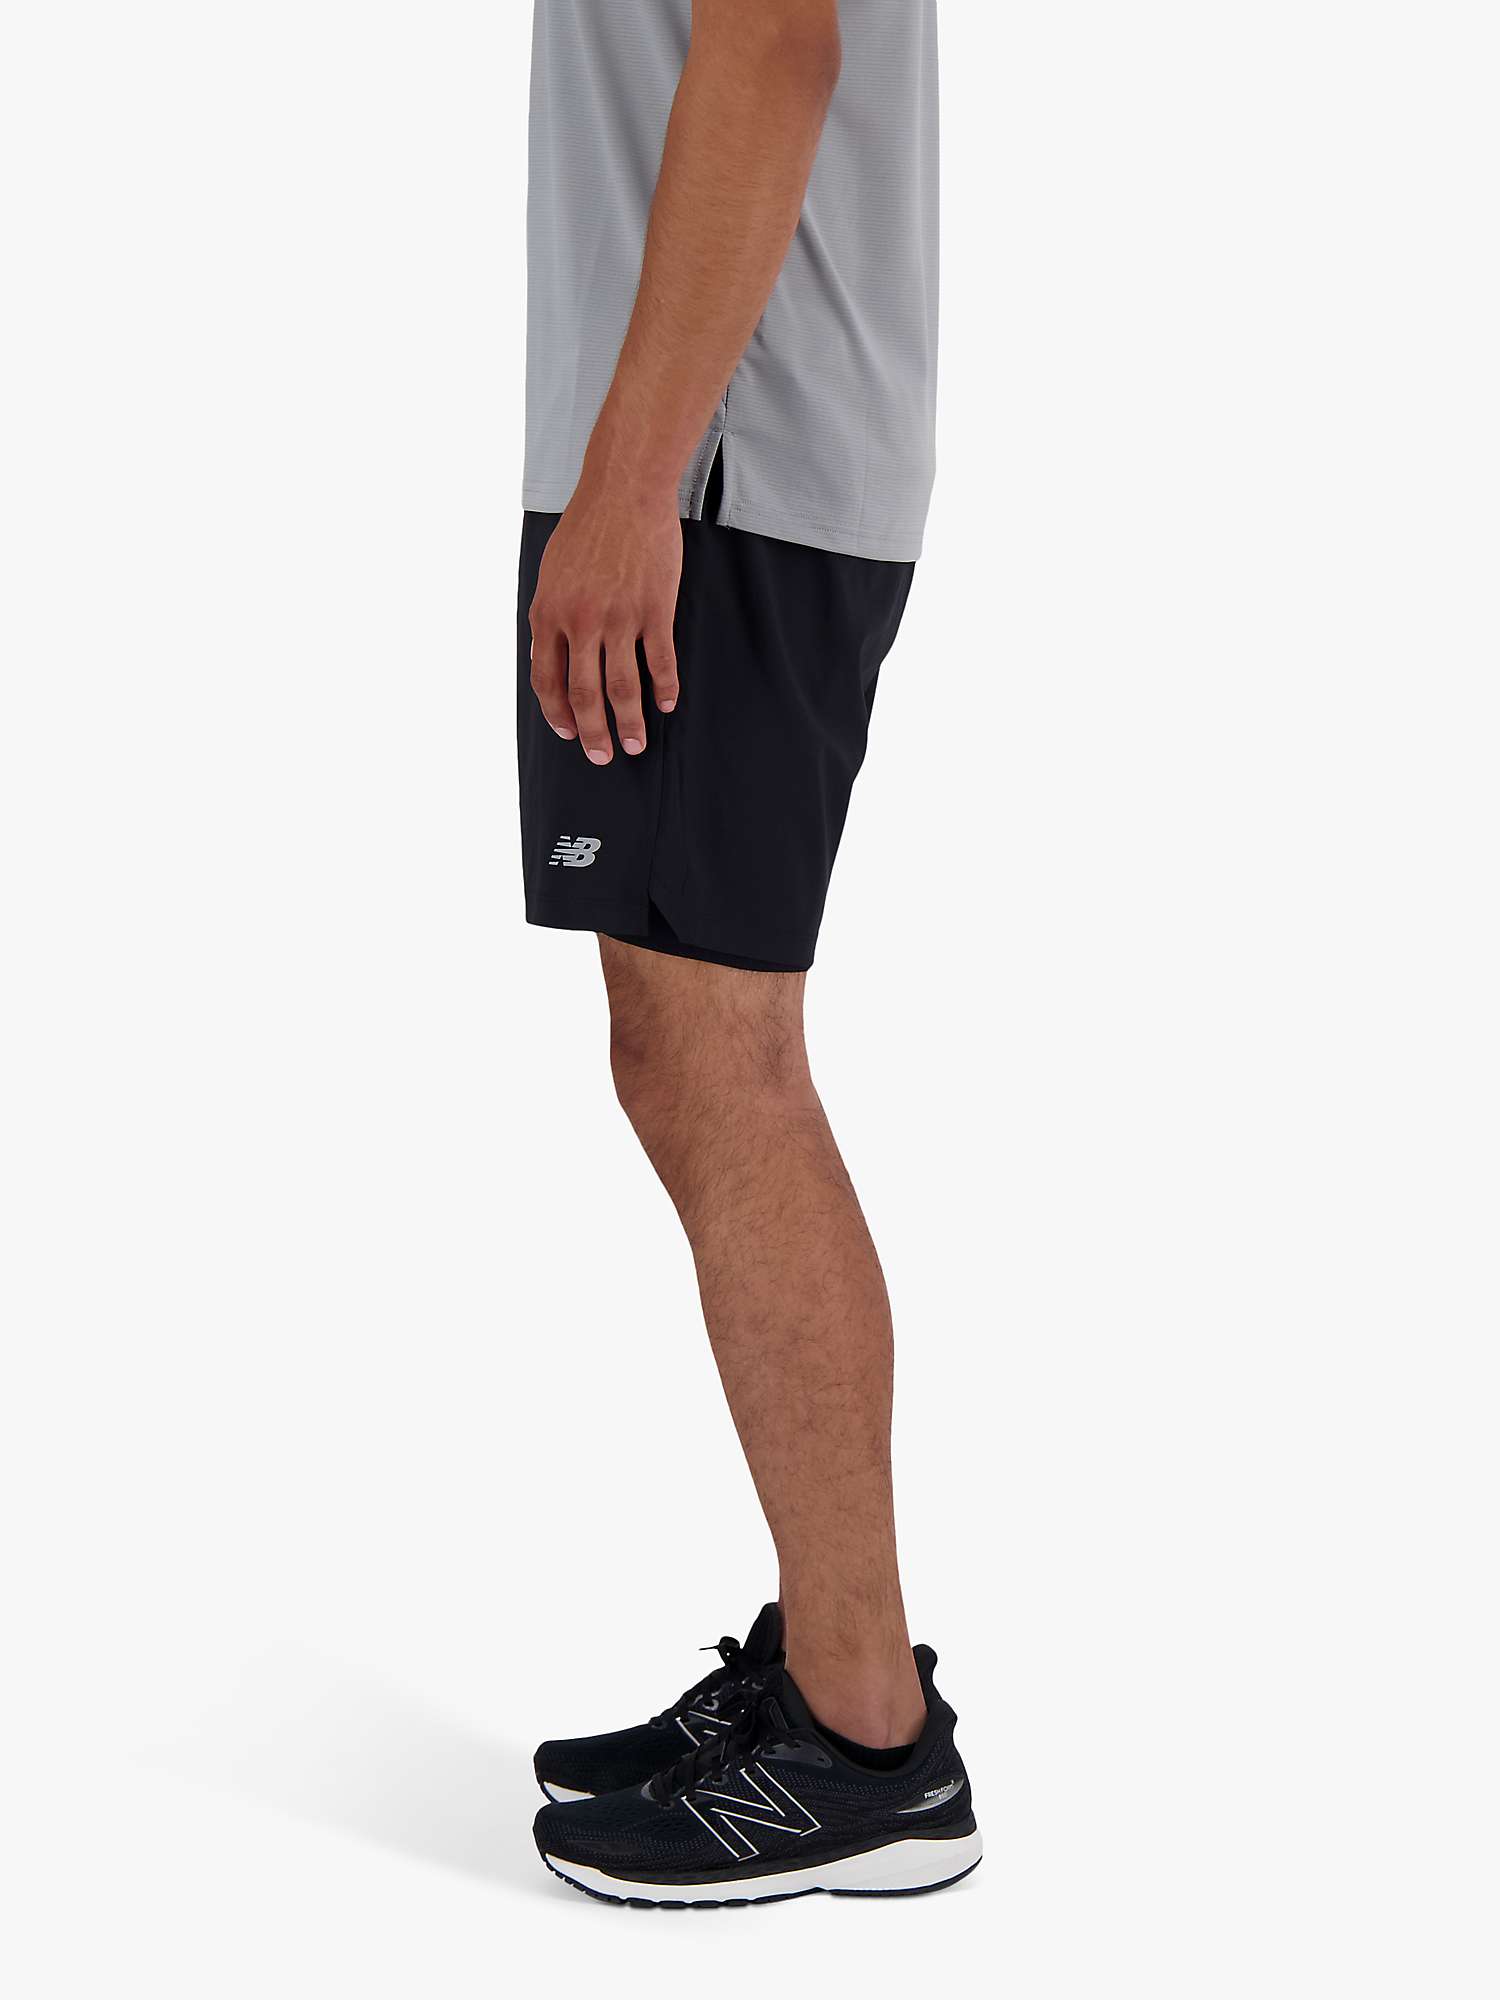 Buy New Balance Seamless 2-in-1 Shorts, Black Online at johnlewis.com